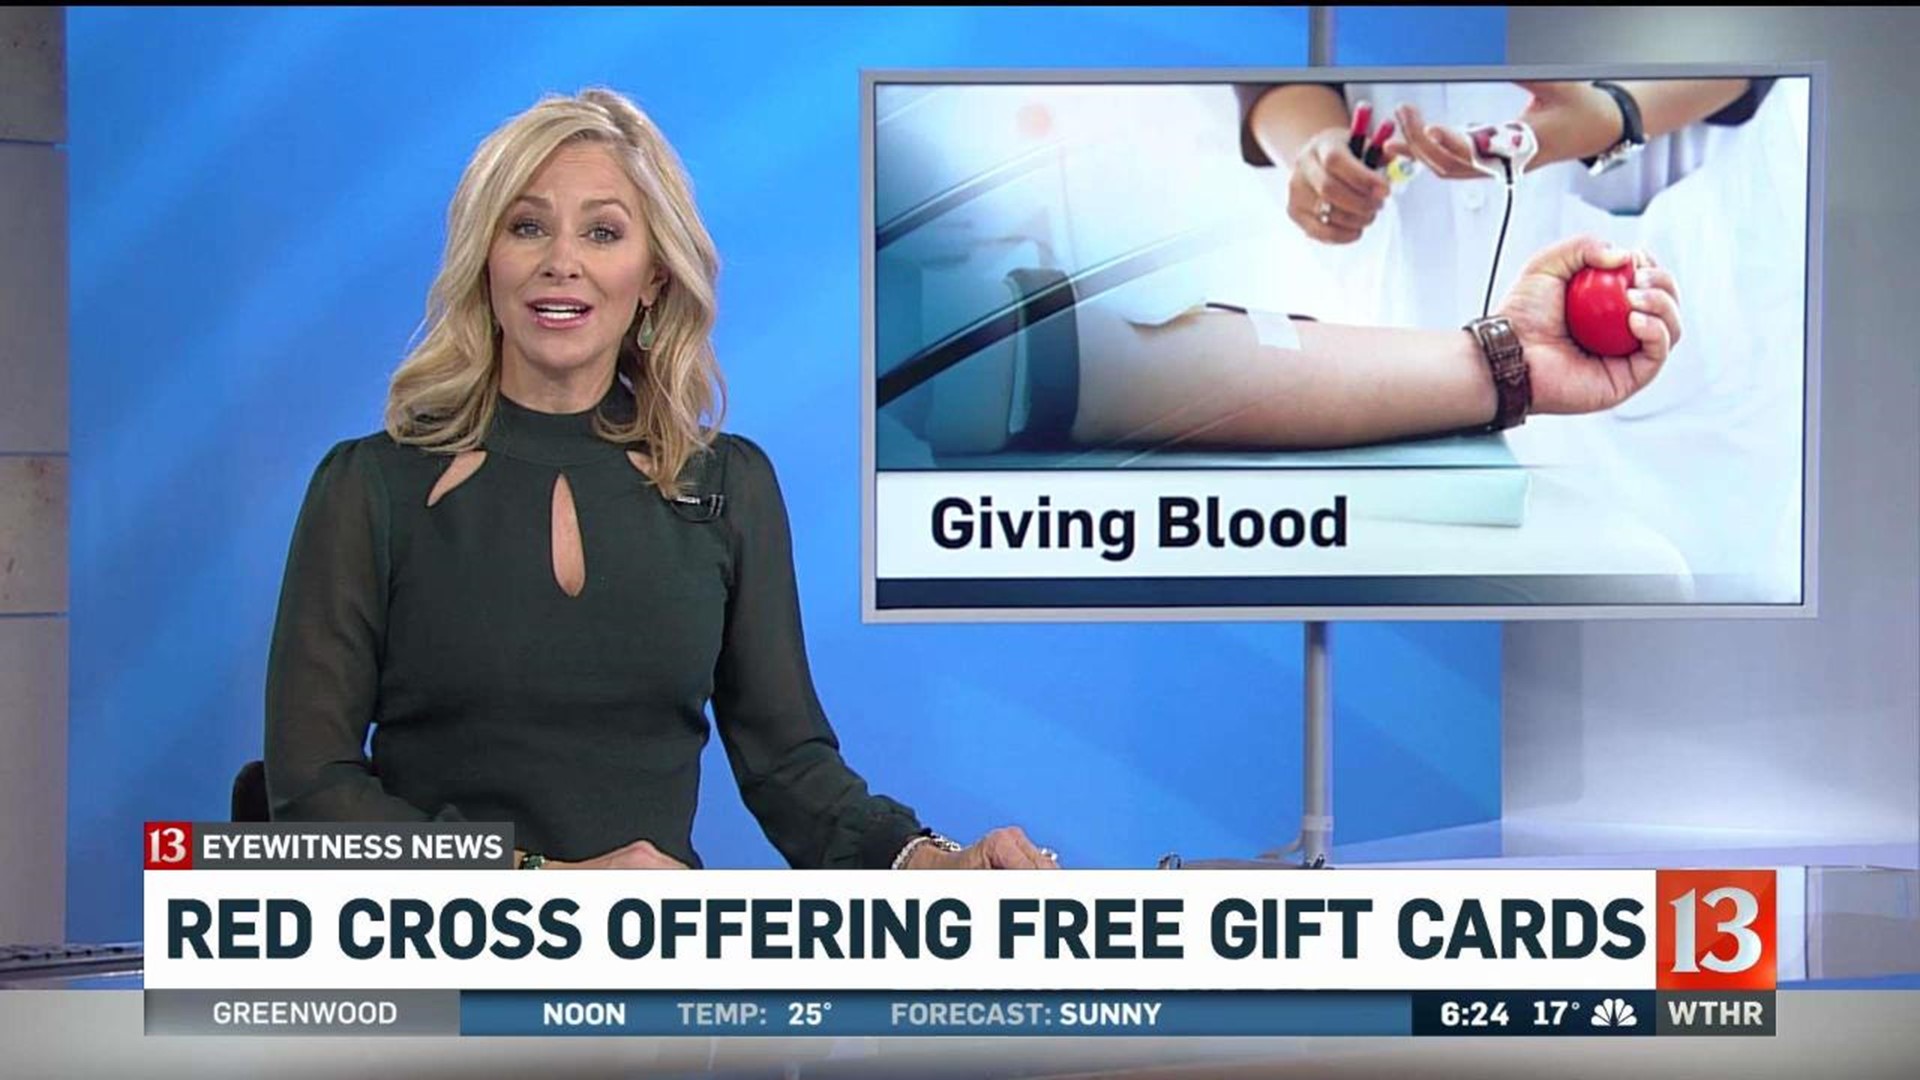 Red Cross offering free gift cards for donating blood